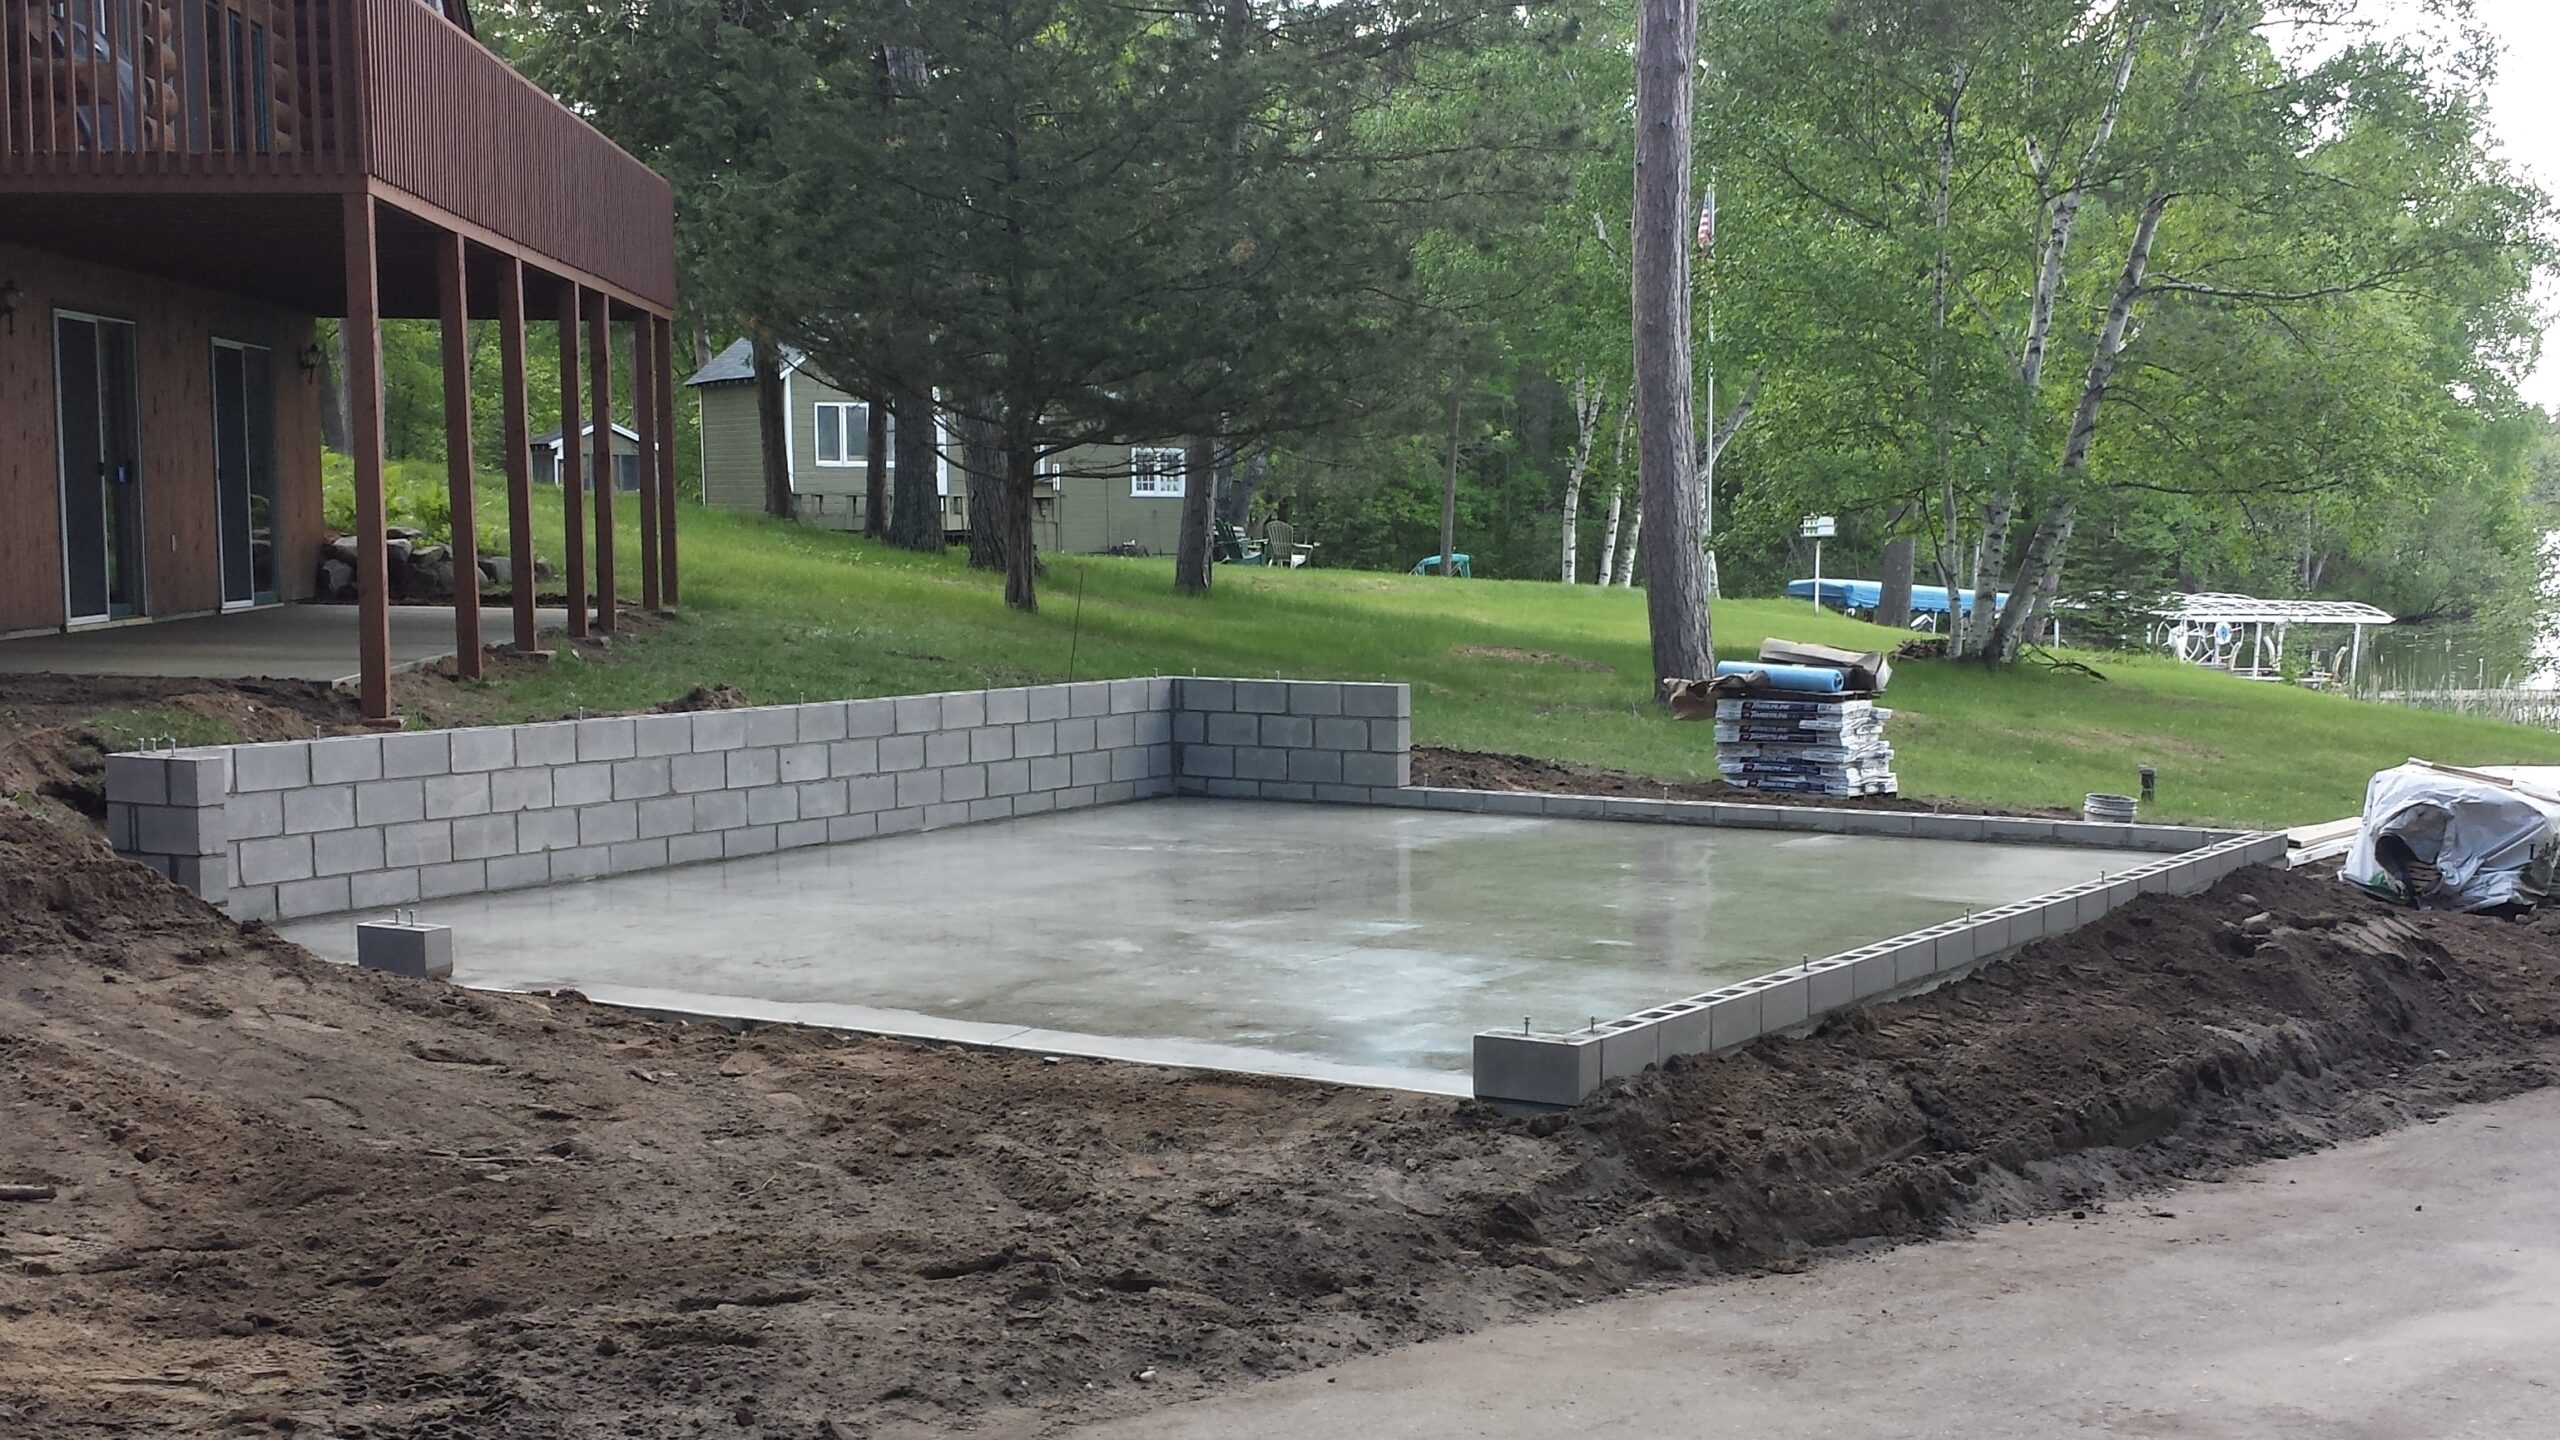 Concrete flatwork services for driveways, garages, sidewalks, floors, paths and other residential and commercial applications in the Twin Cities metro area.